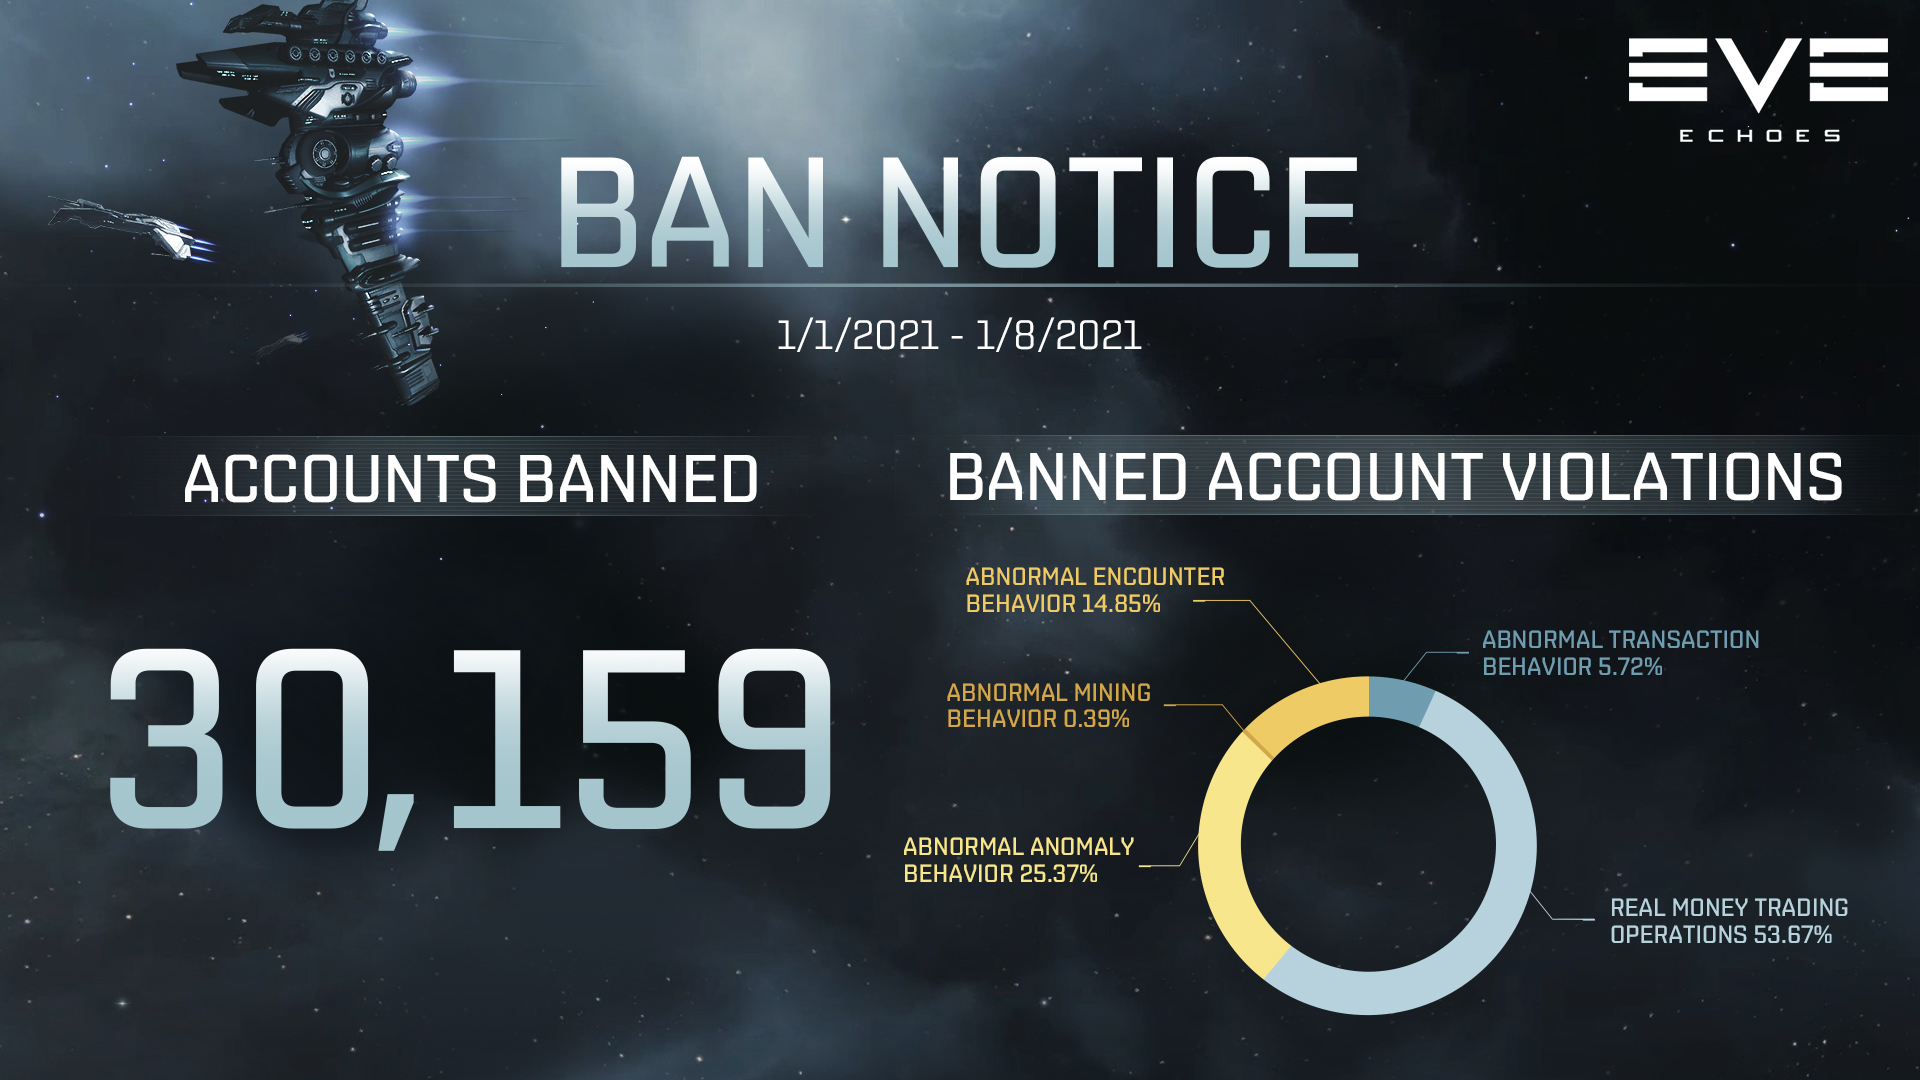 Ban Notice for 01/01-01/08